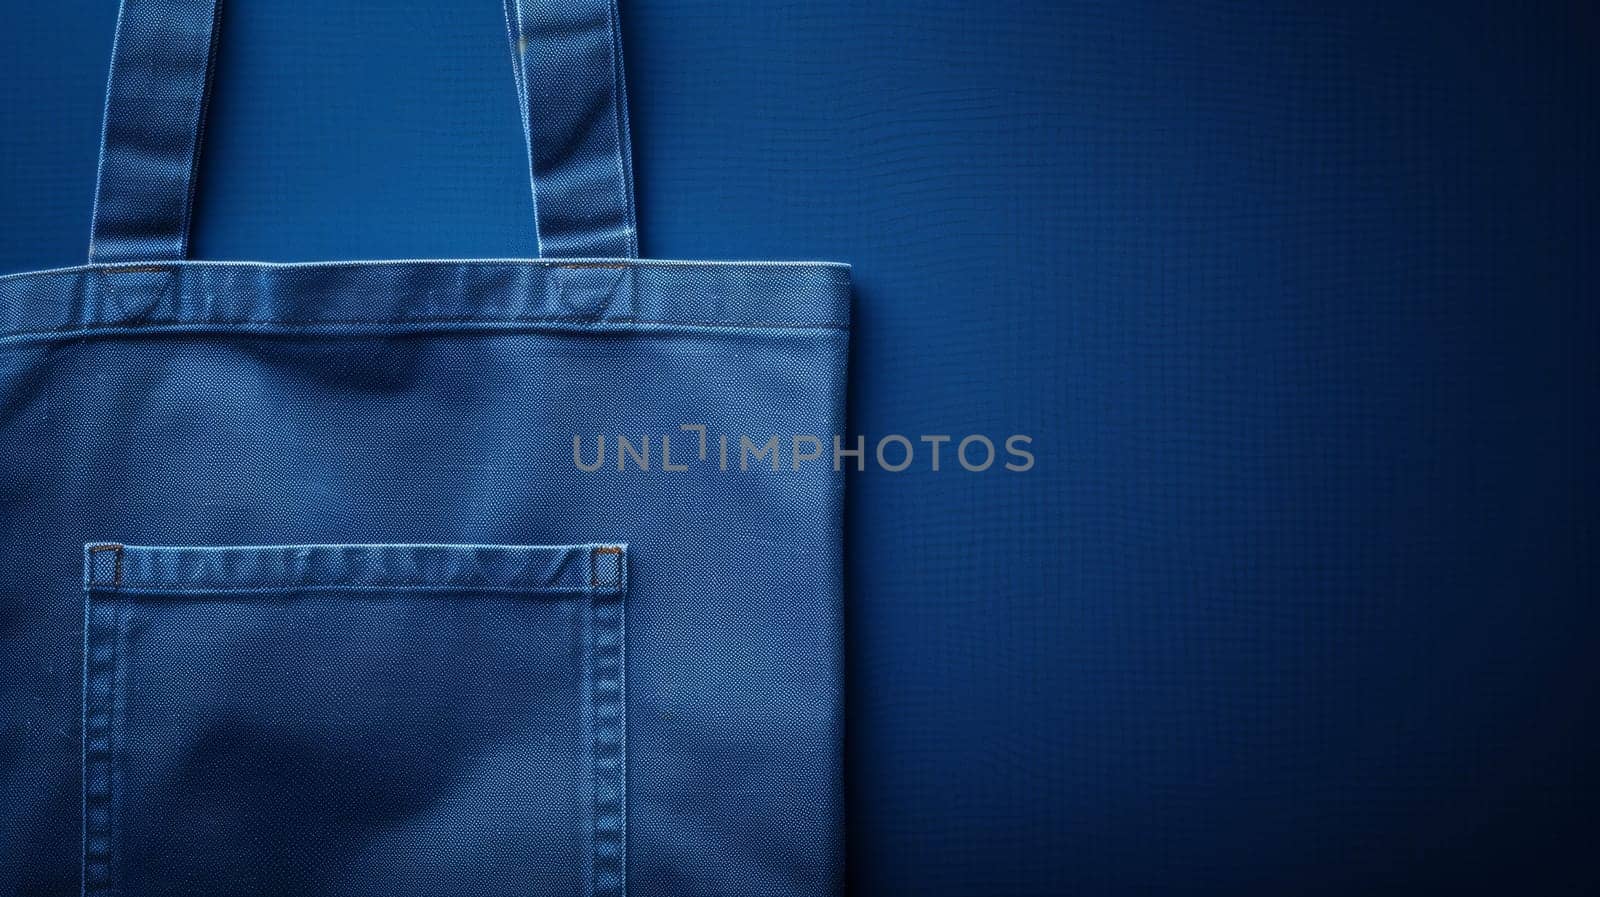 A blue bag with a pocket on the side of it